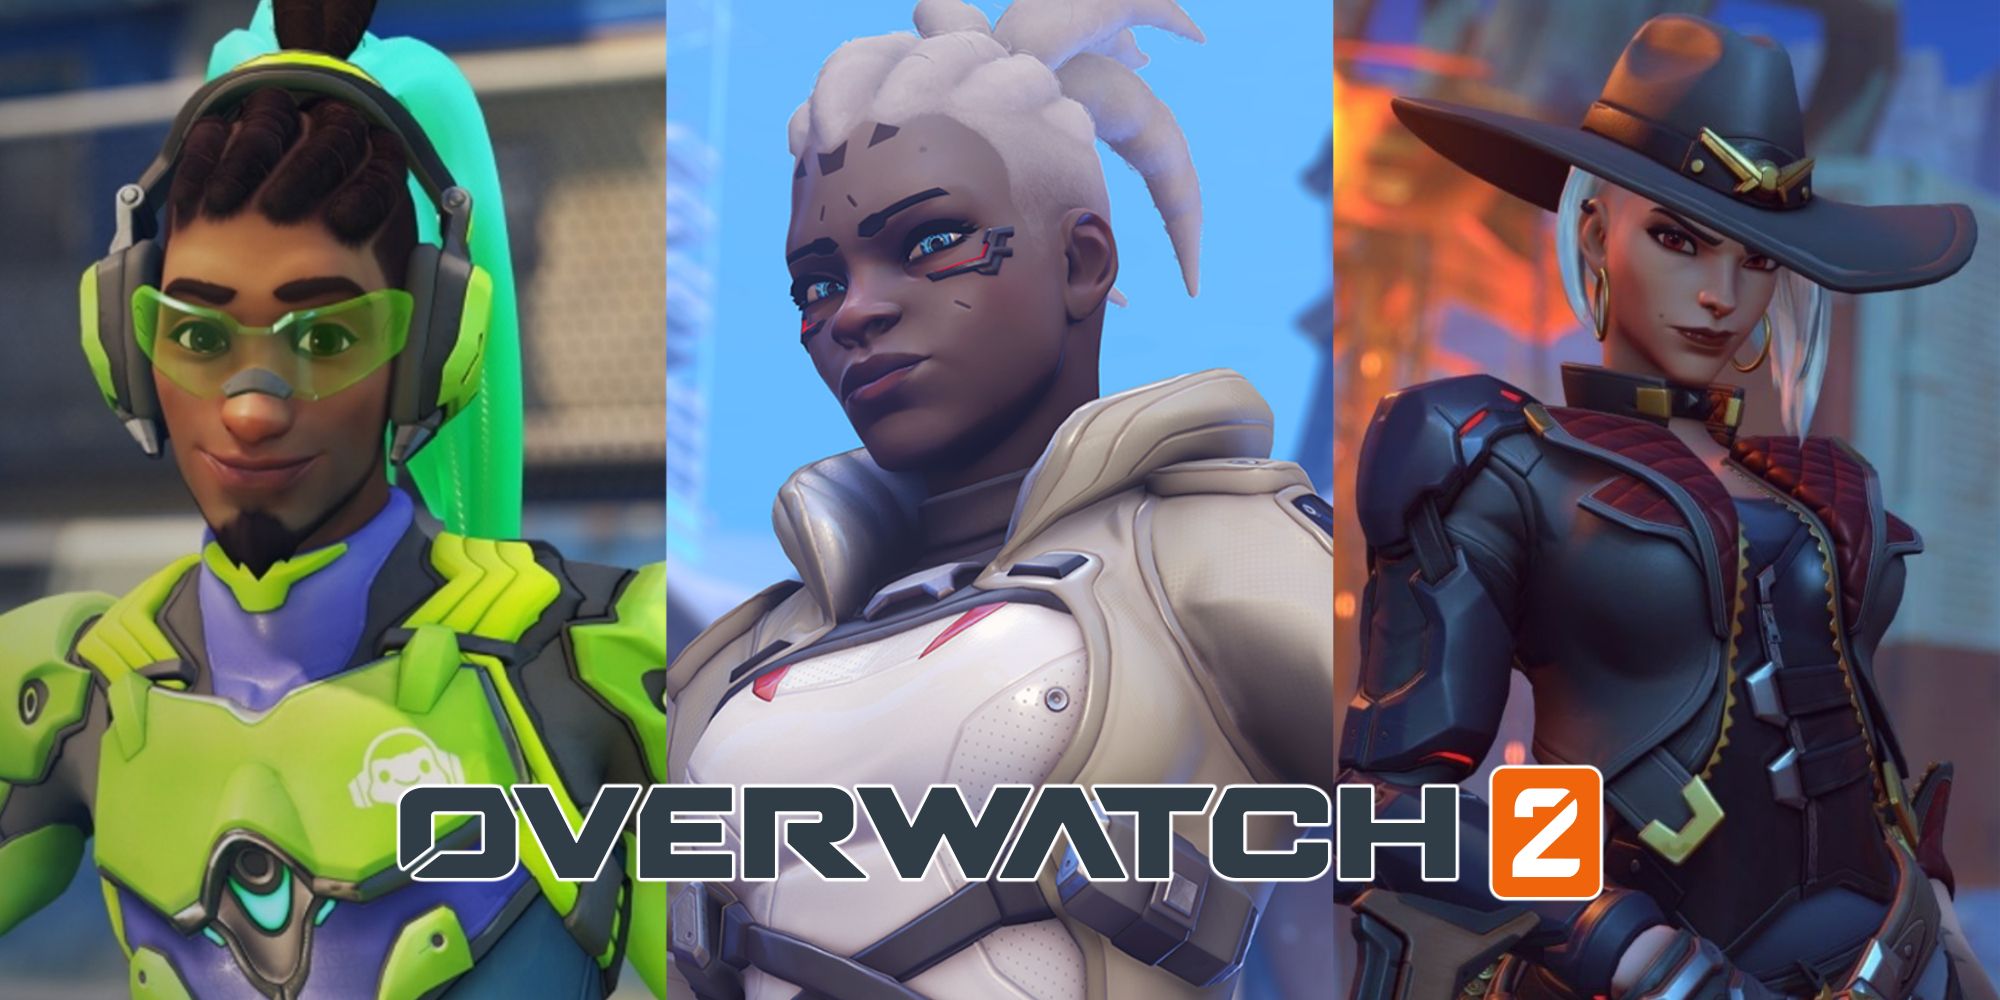 Split image of Sojourn, Lucio, and Ashe in Overwatch 2